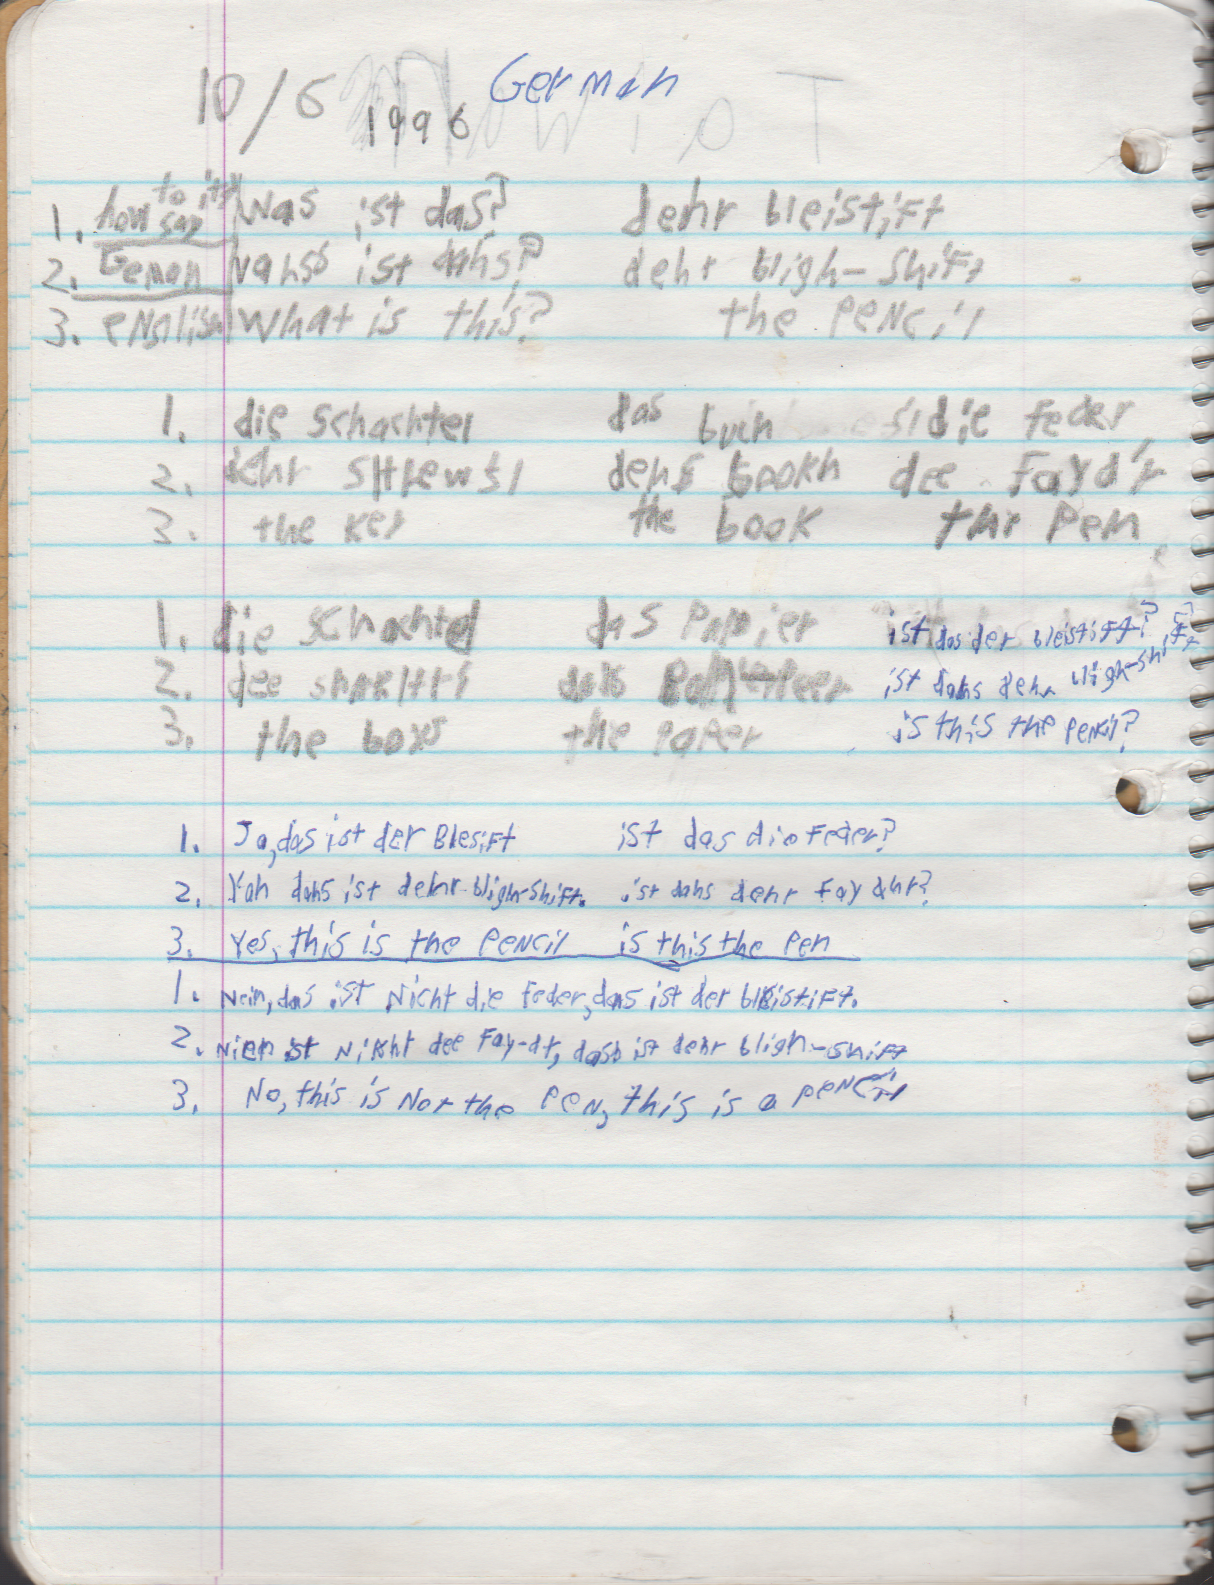 1996-08-18 - Saturday - 11 yr old Joey Arnold's School Book, dates through to 1998 apx, mostly 96, Writings, Drawings, Etc-012.png